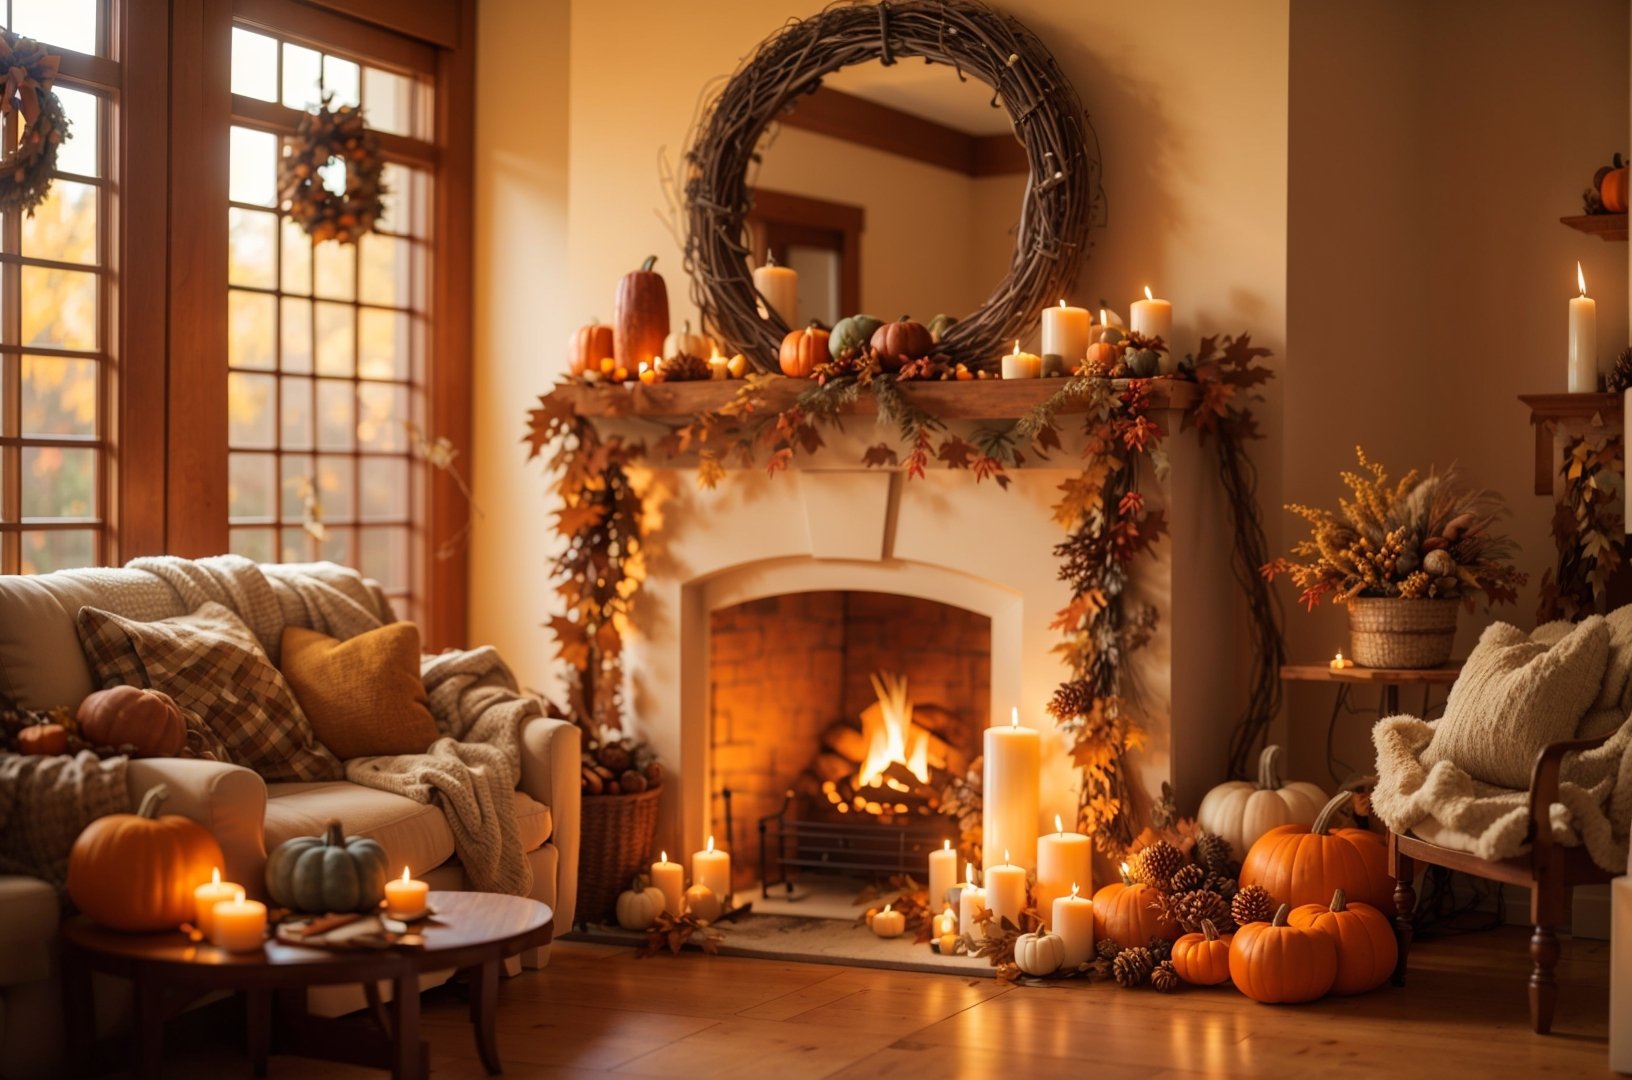 Crafting Cozy: DIY Fall Home Décor Ideas to Warm Up Your Space